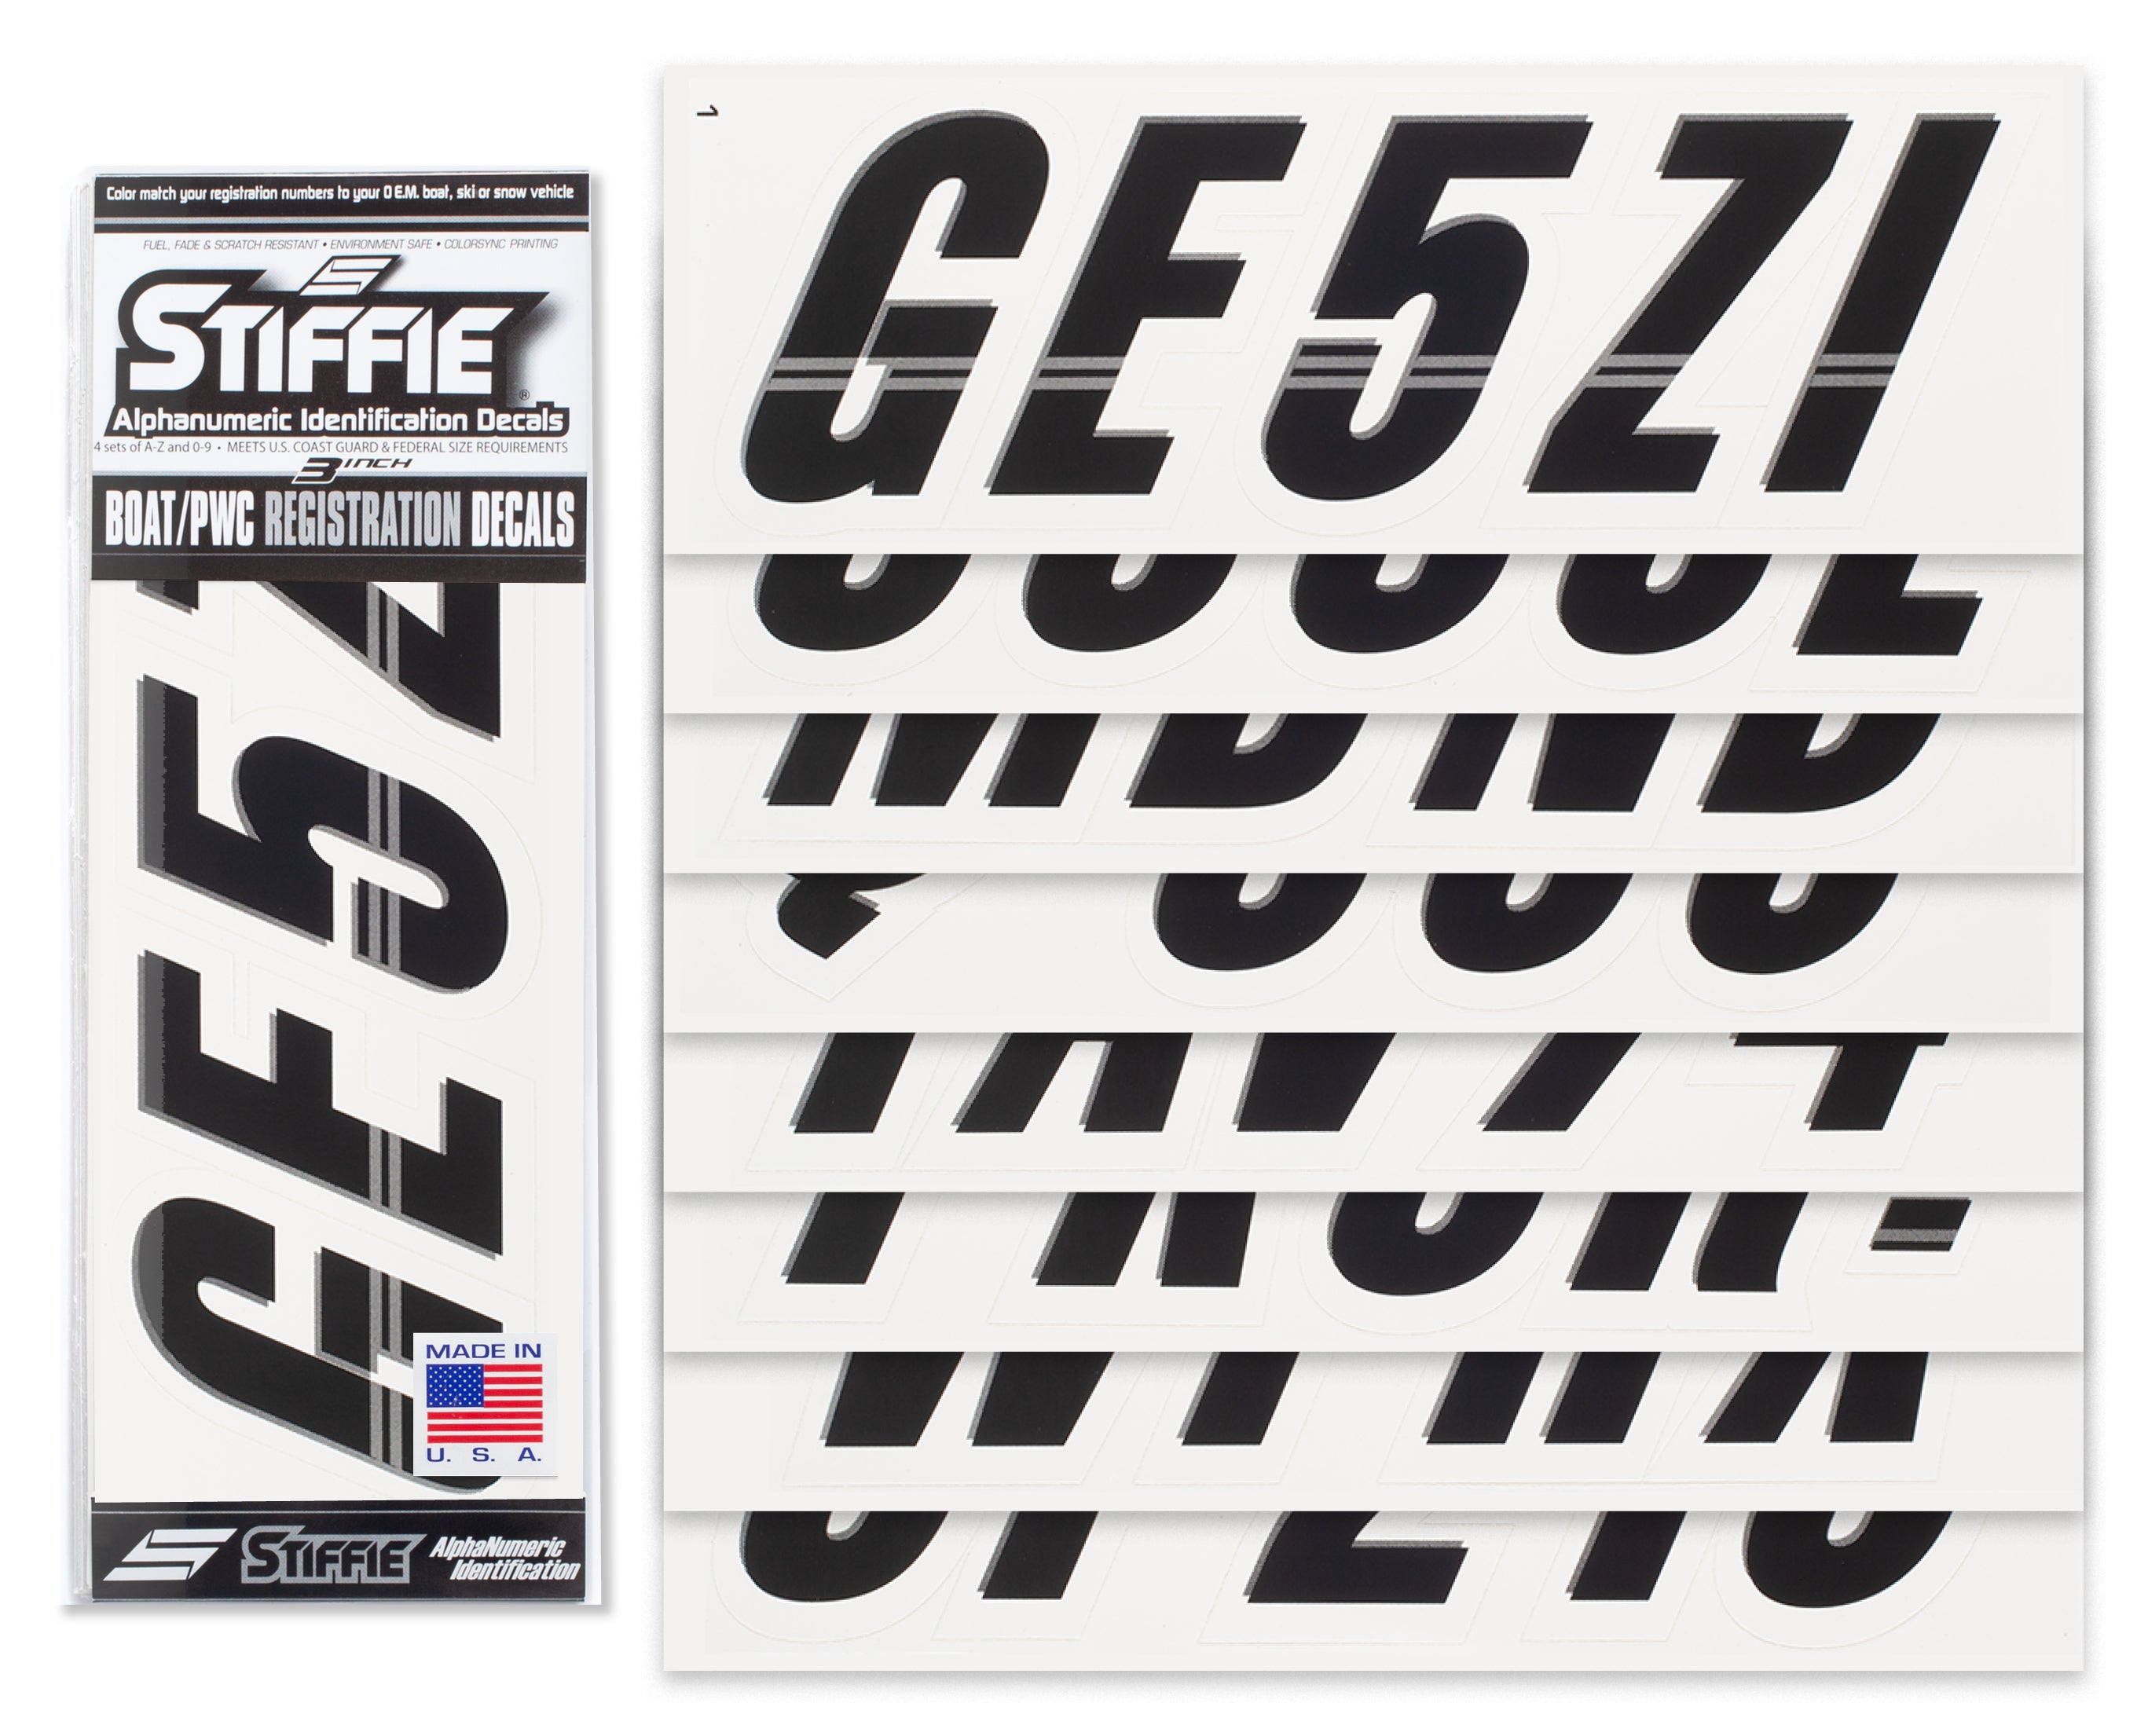 STIFFIE Techtron Black/White 3" Alpha-Numeric Registration Identification Numbers Stickers Decals for Boats & Personal Watercraft